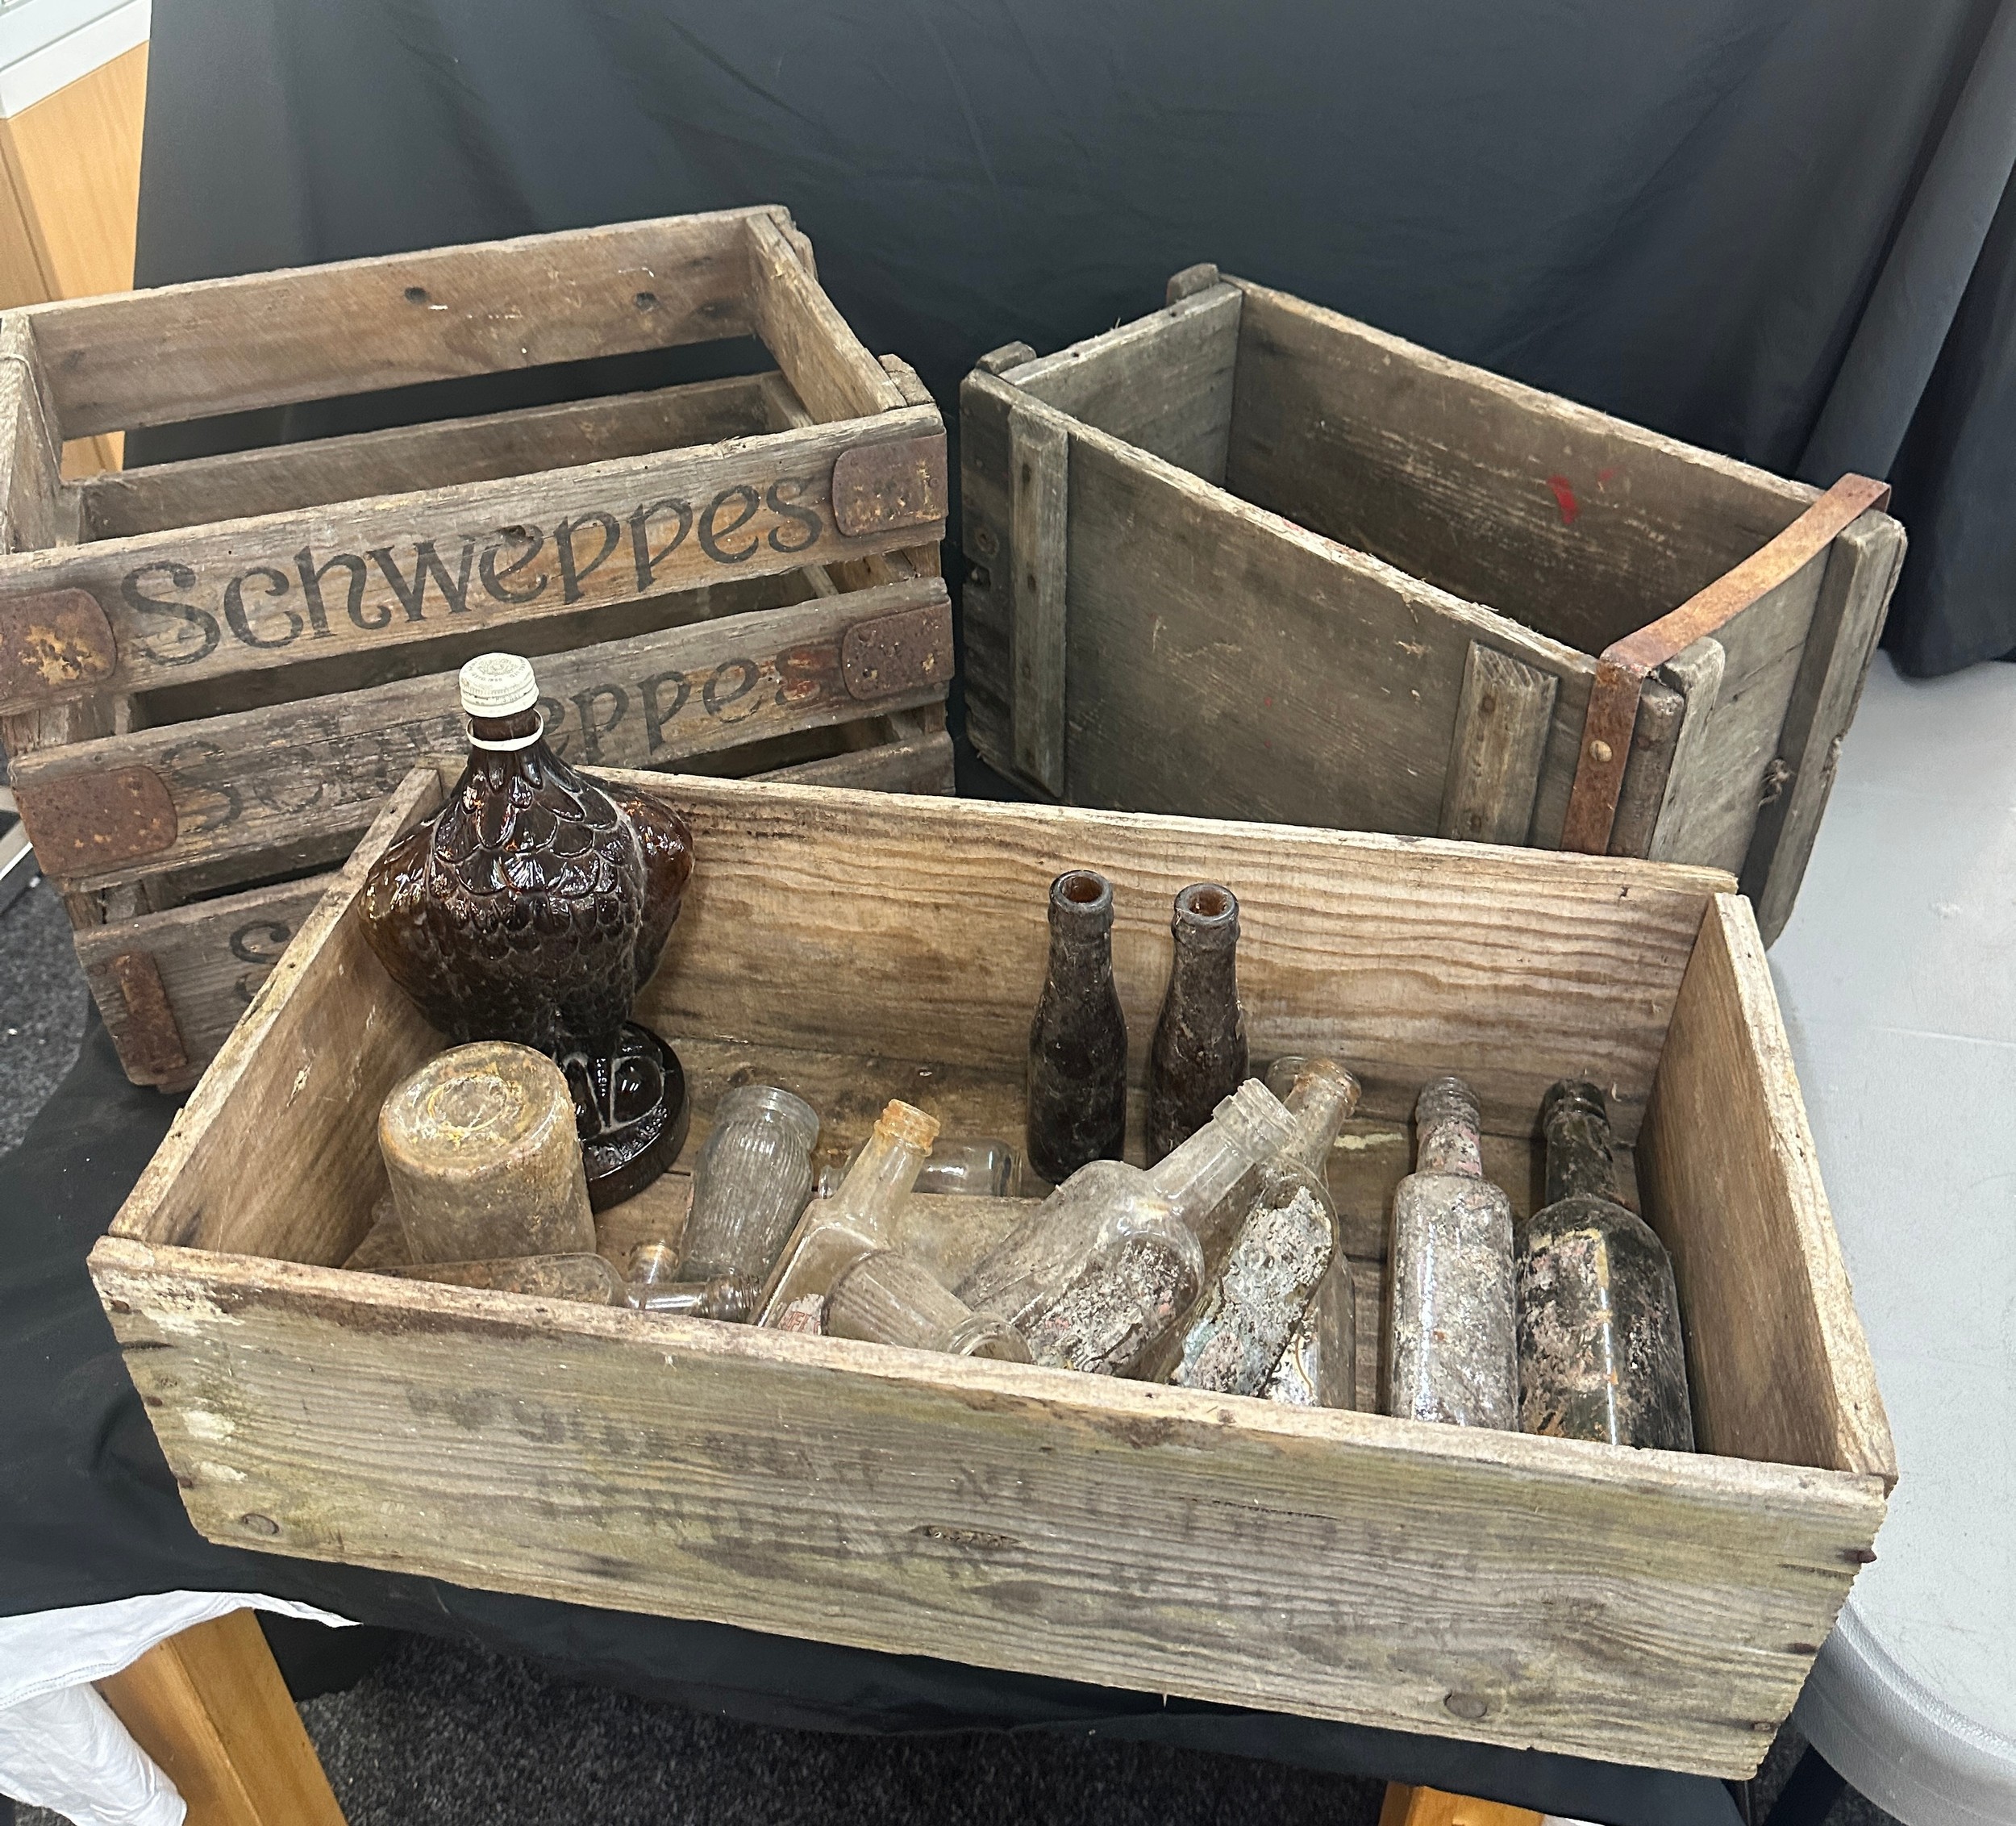 Carboy (large) portugese wooden sardines box advertising bottle, schwepps crate and wooden ammo box